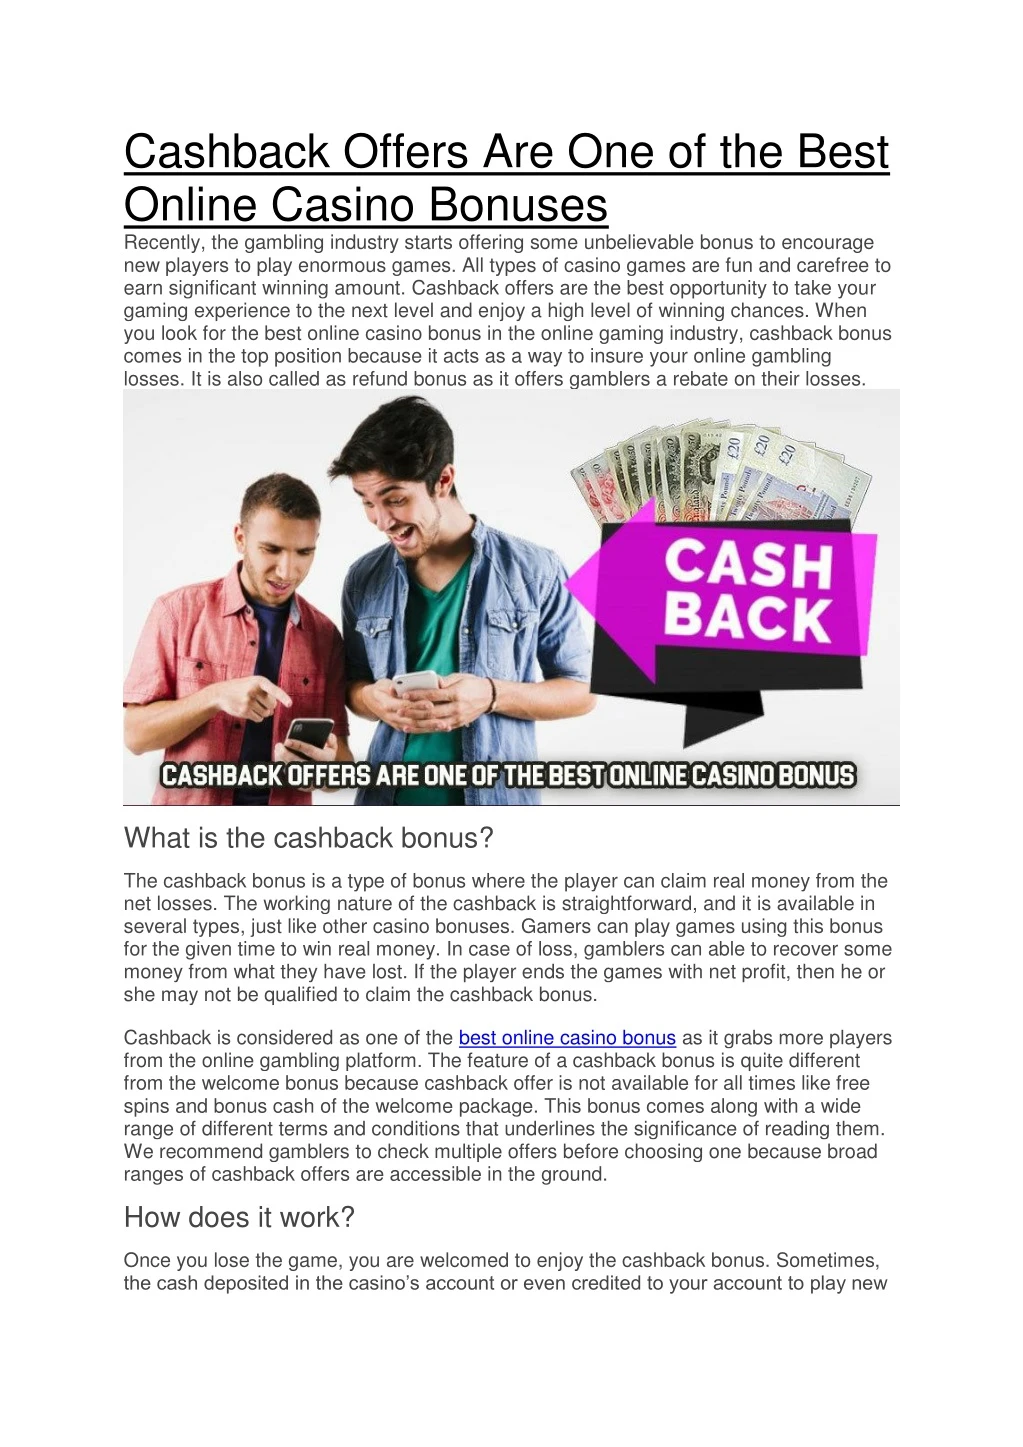 cashback offers are one of the best online casino